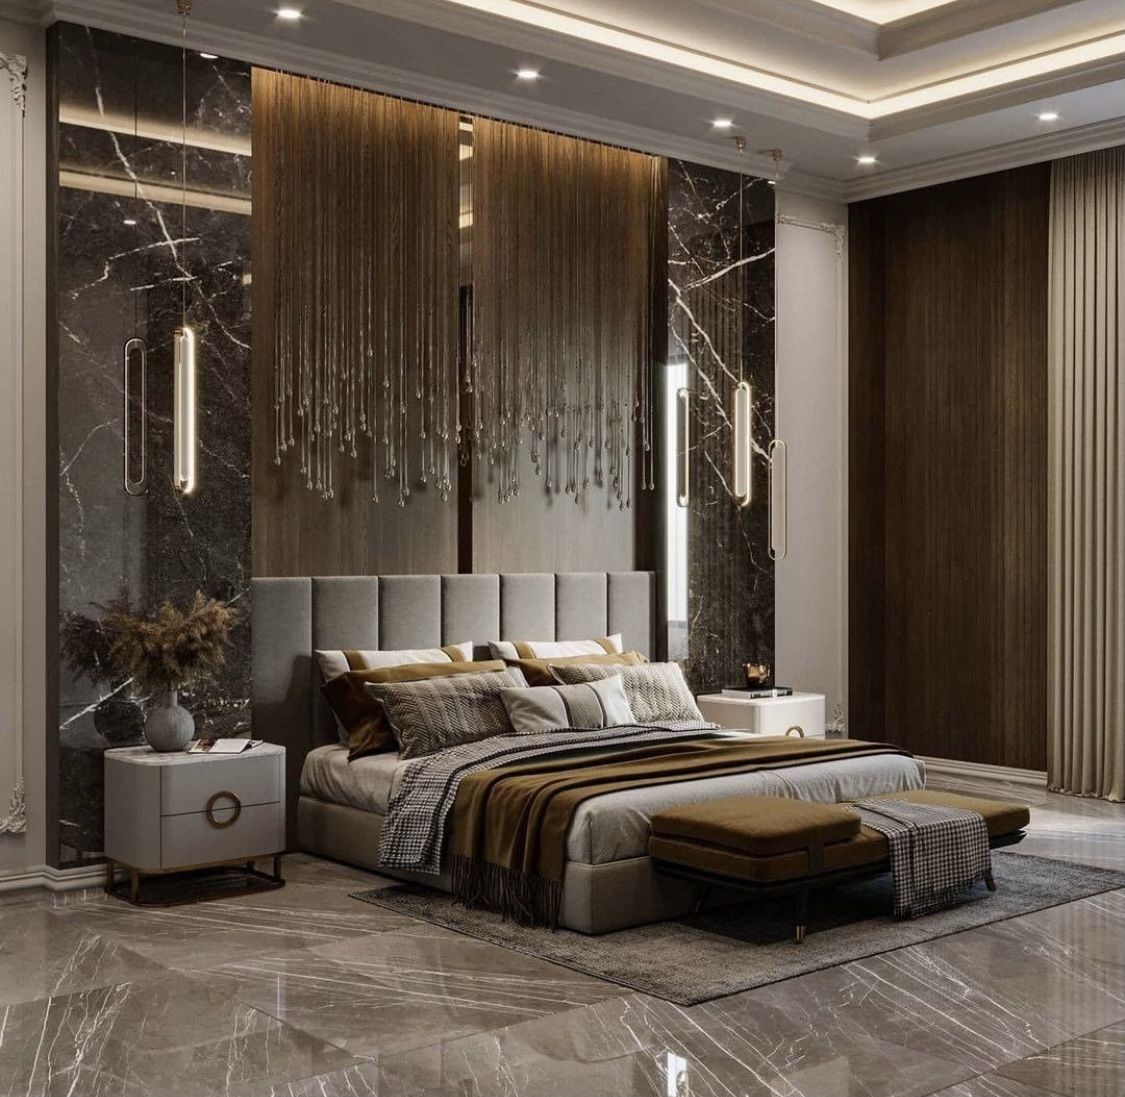 Luxury modern interior bedroom bedrooms luxurious master furniture contemporary choose board moroccan